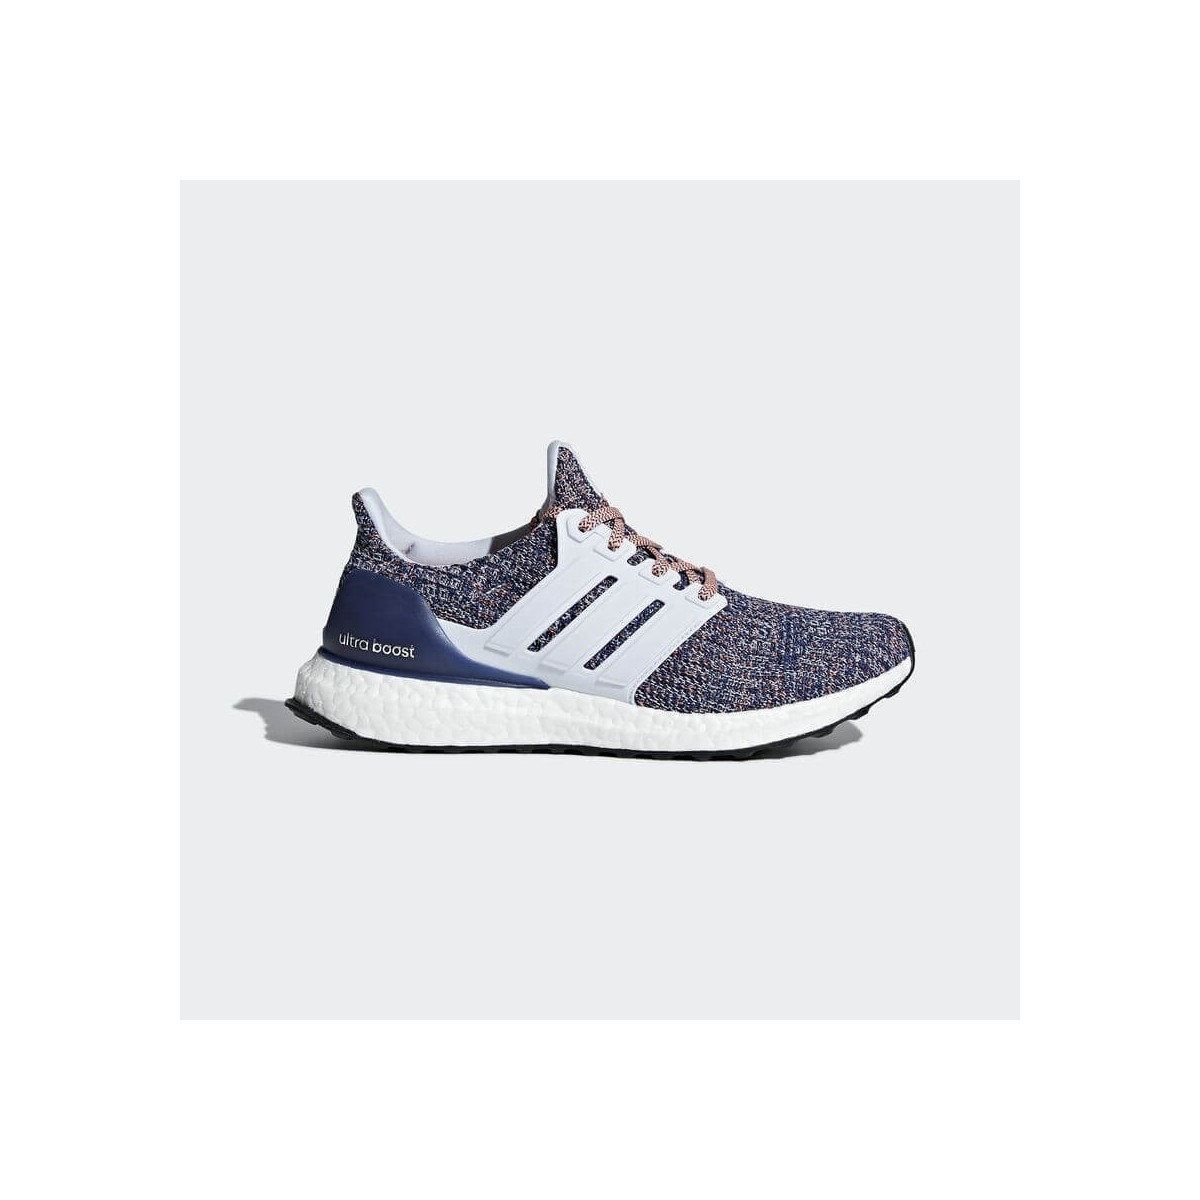 Adidas Ultra 4.0 Women's Shoes Multicolor SS18